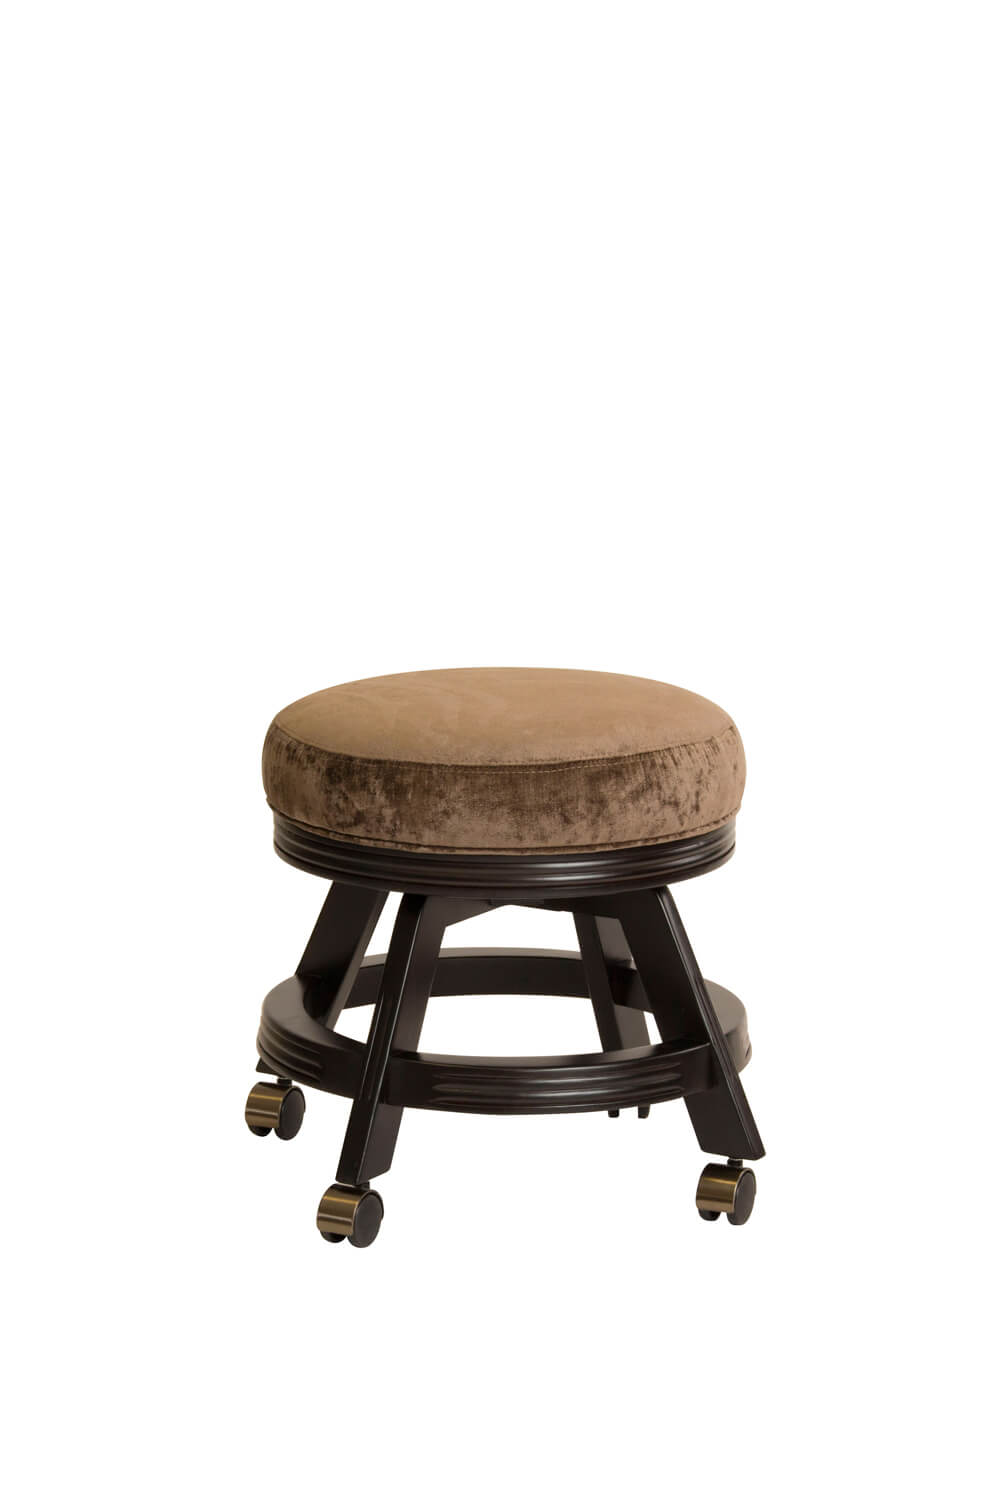 938 Maple Backless Vanity Swivel Stool with Casters